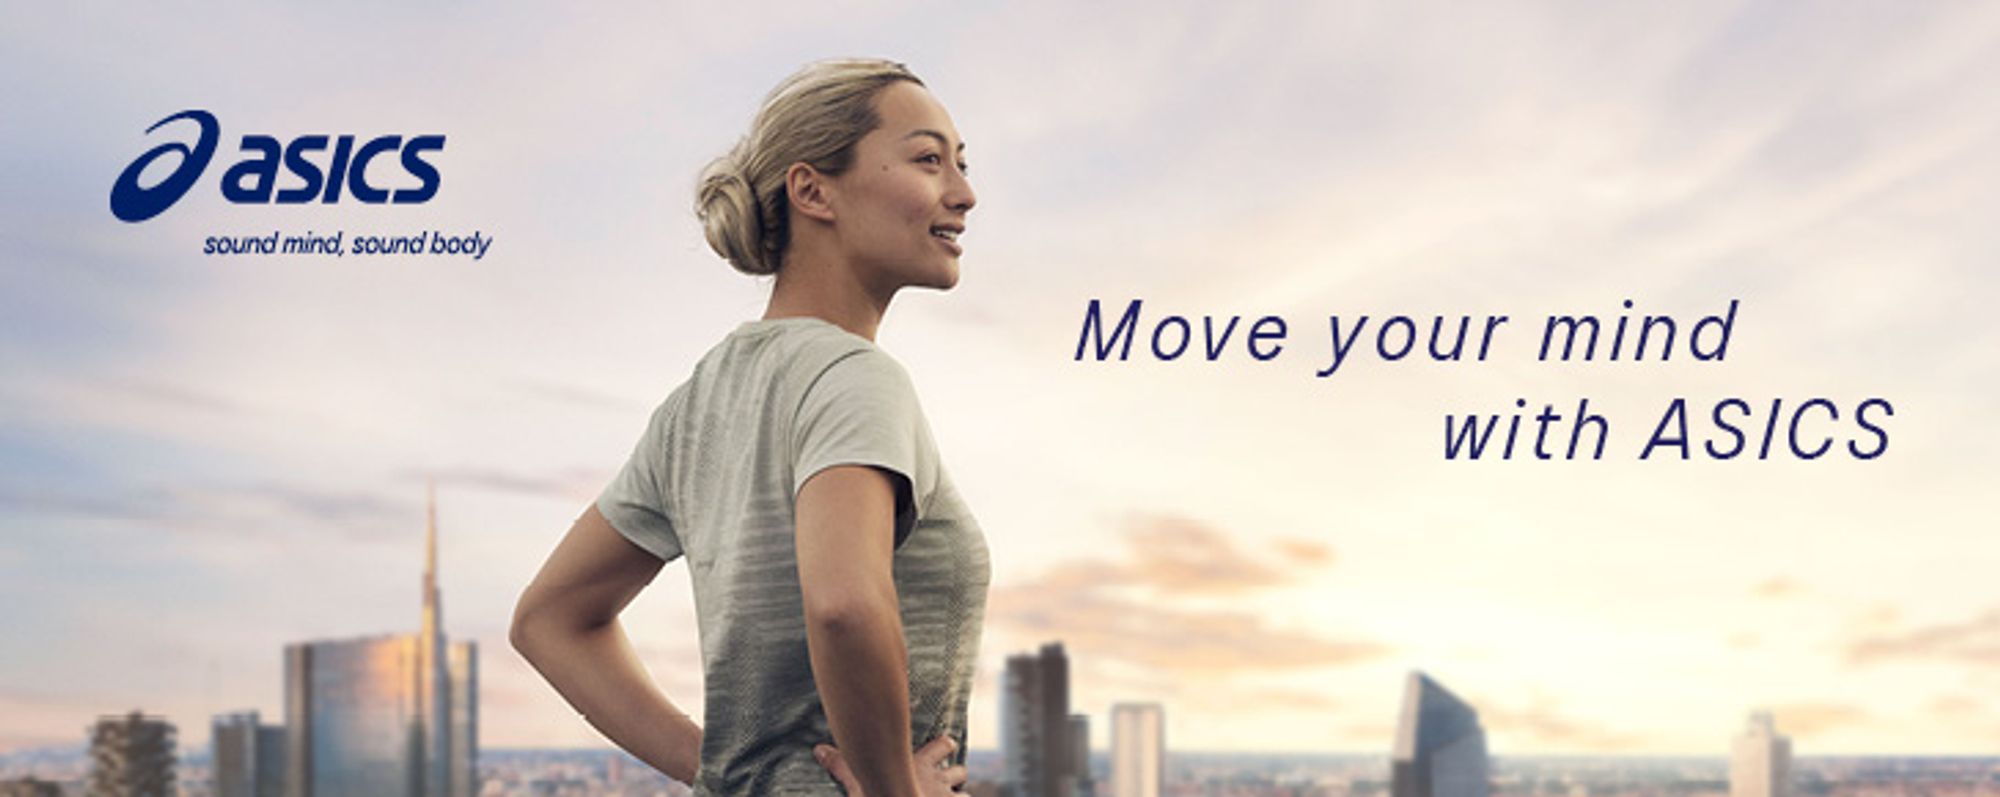 move-your-mind-with-ASICS